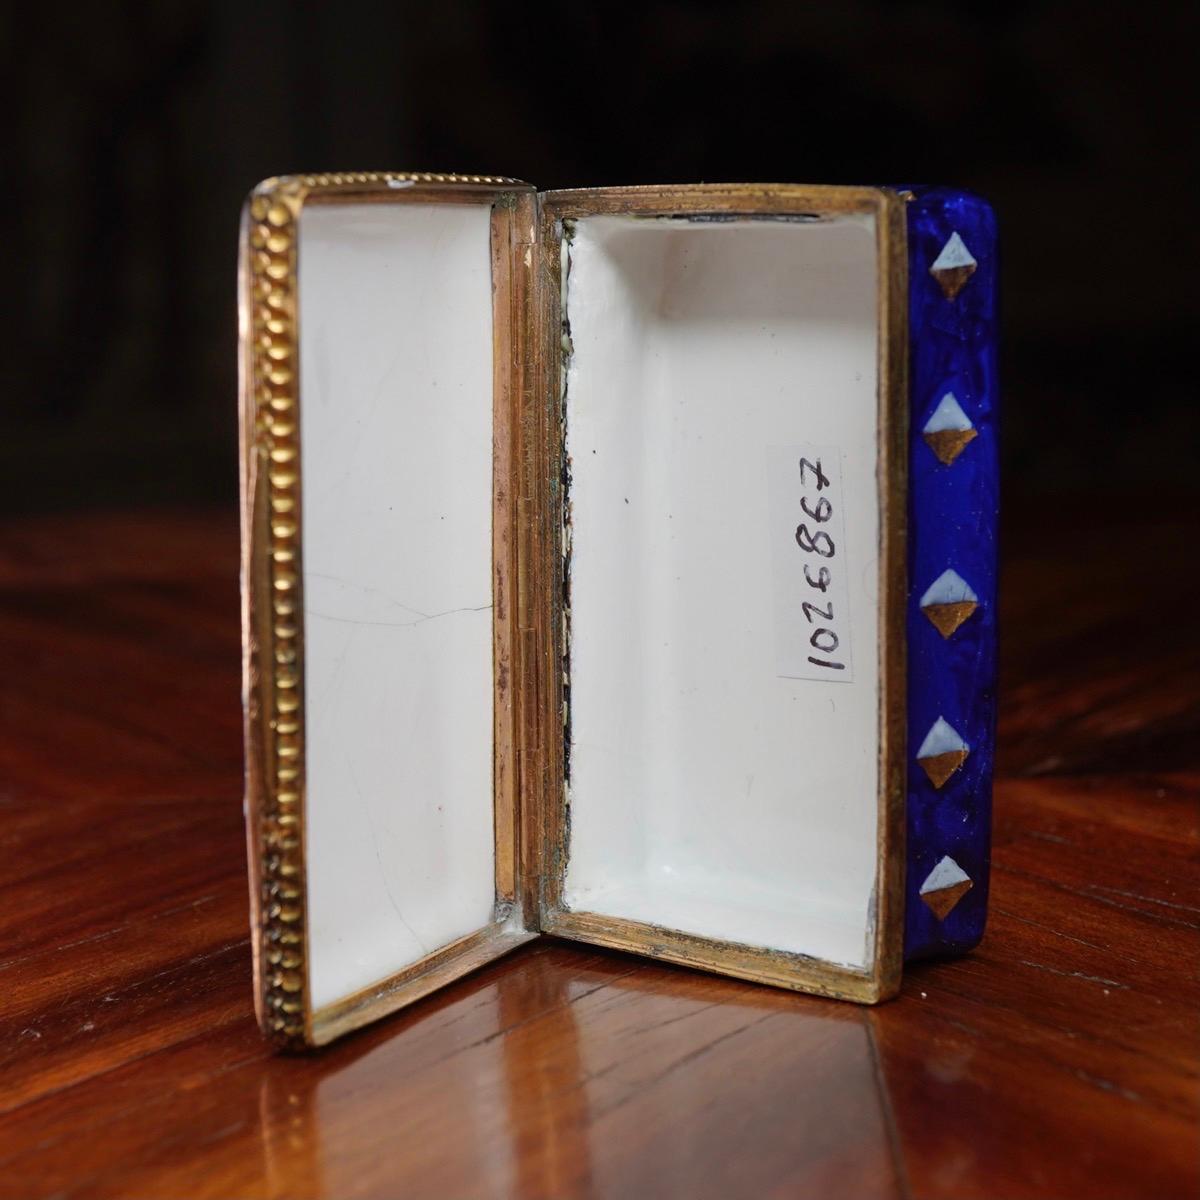 English Enamel Snuff Box, Blue with Flower Panel, circa 1780 In Good Condition For Sale In Geelong, Victoria